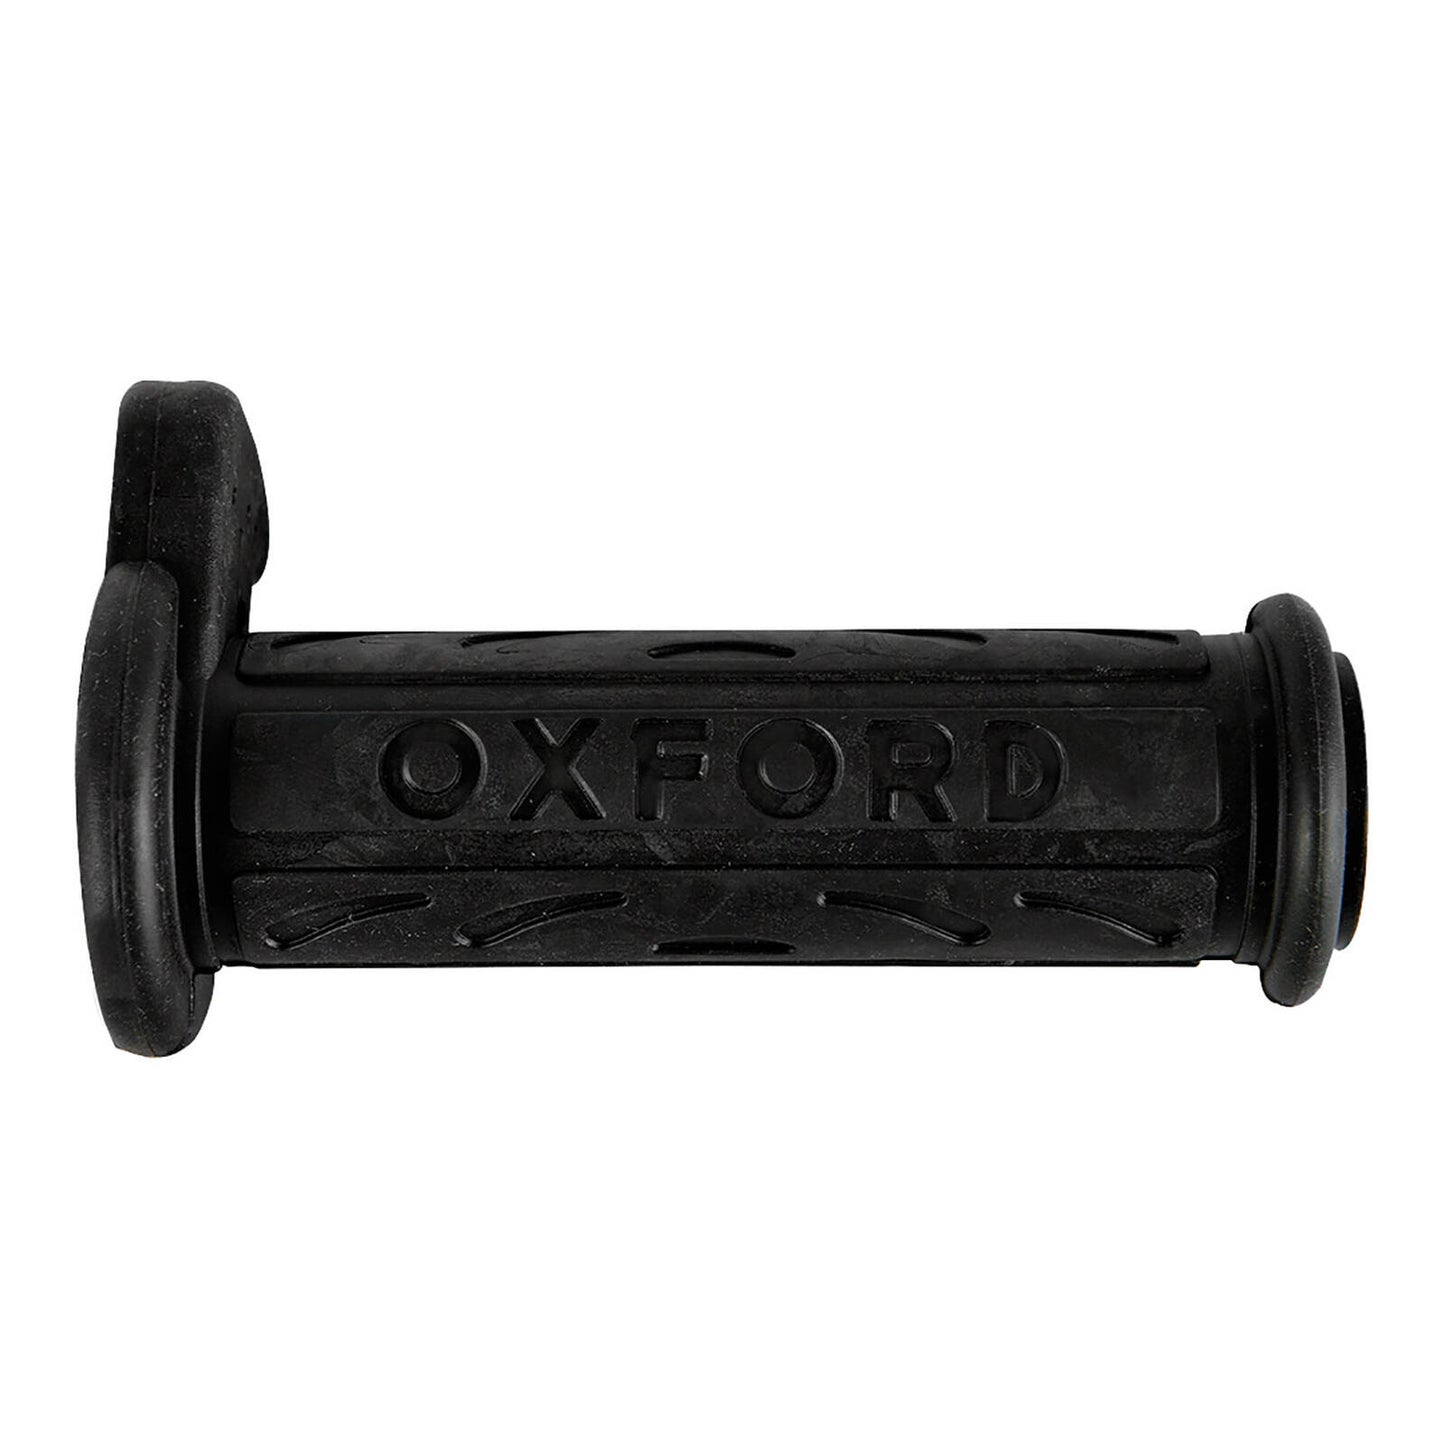 OXFORD HOT GRIPS COMMUTER with Hi/LO SWITCH